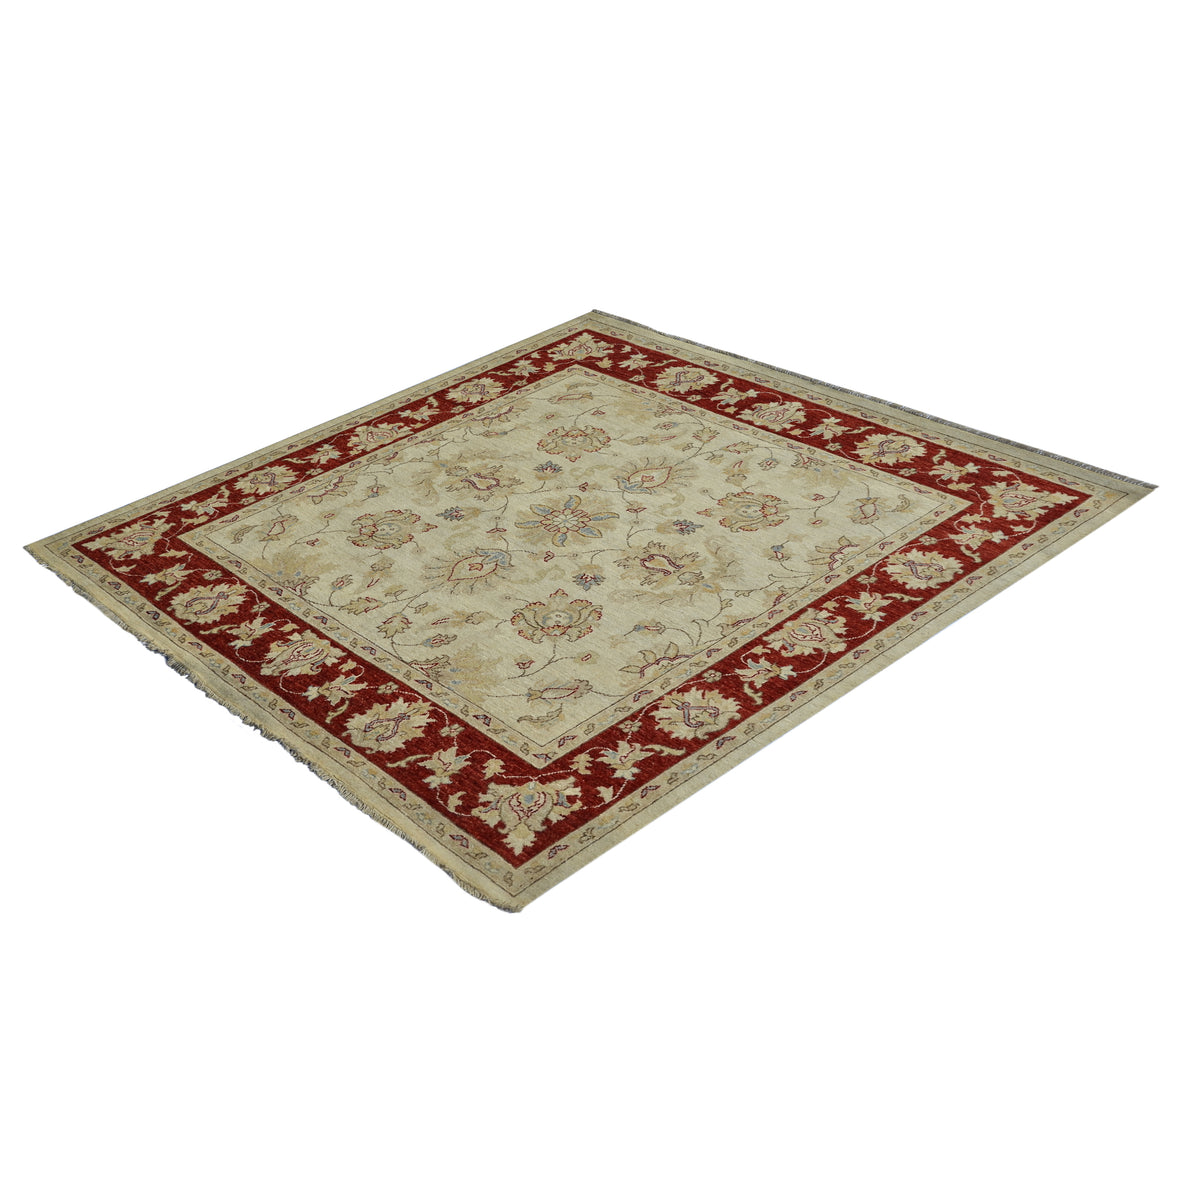 Fine Hand-knotted Wool Chobi Square Rug 202cm x 203cm